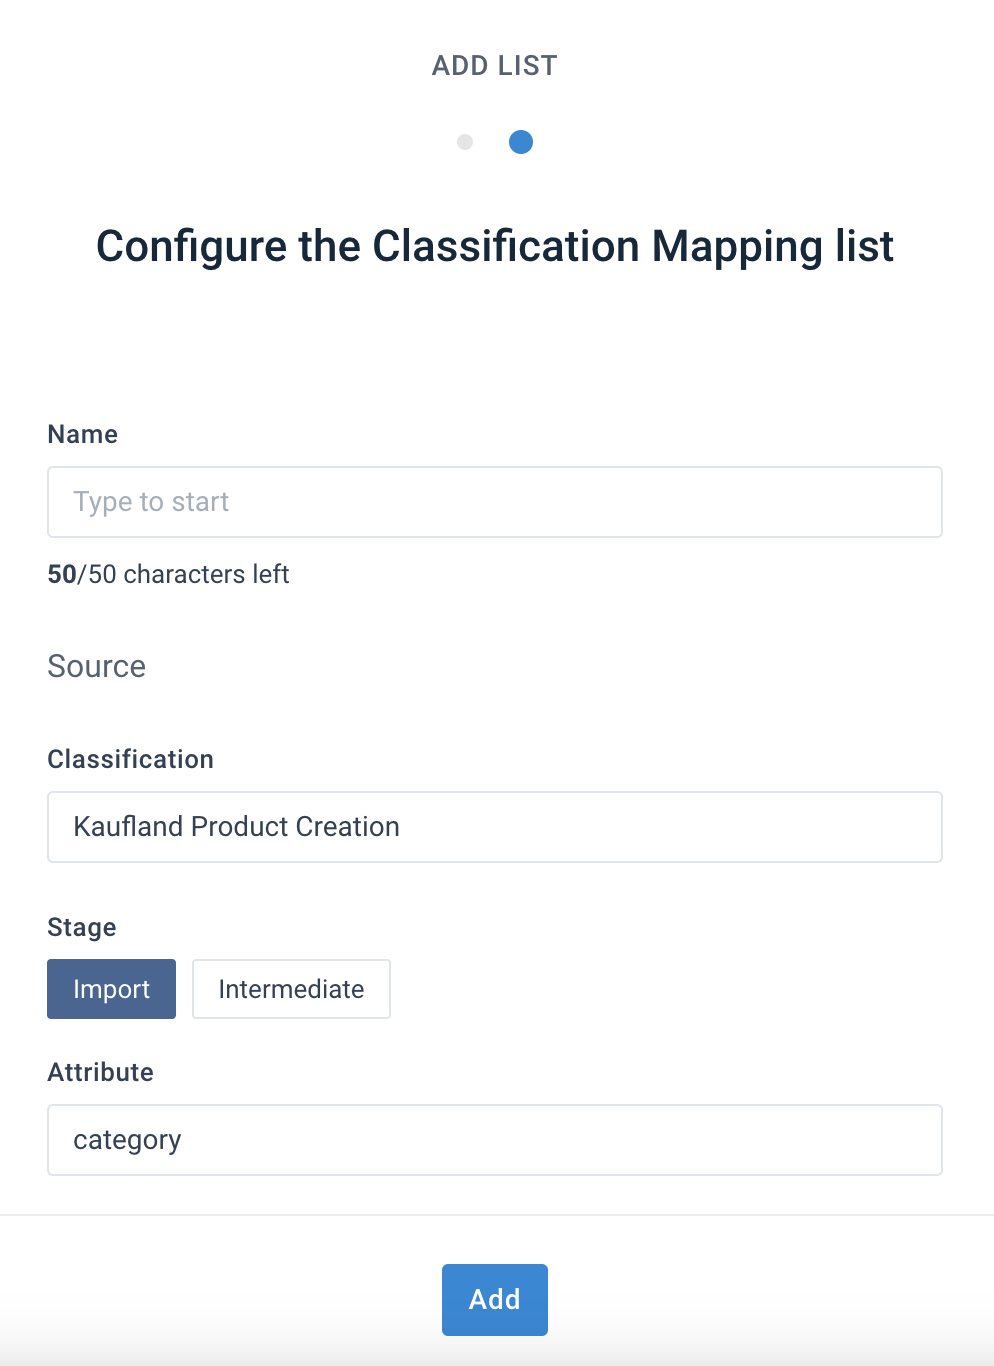 add the Kaufland Product Creation classification mapping list